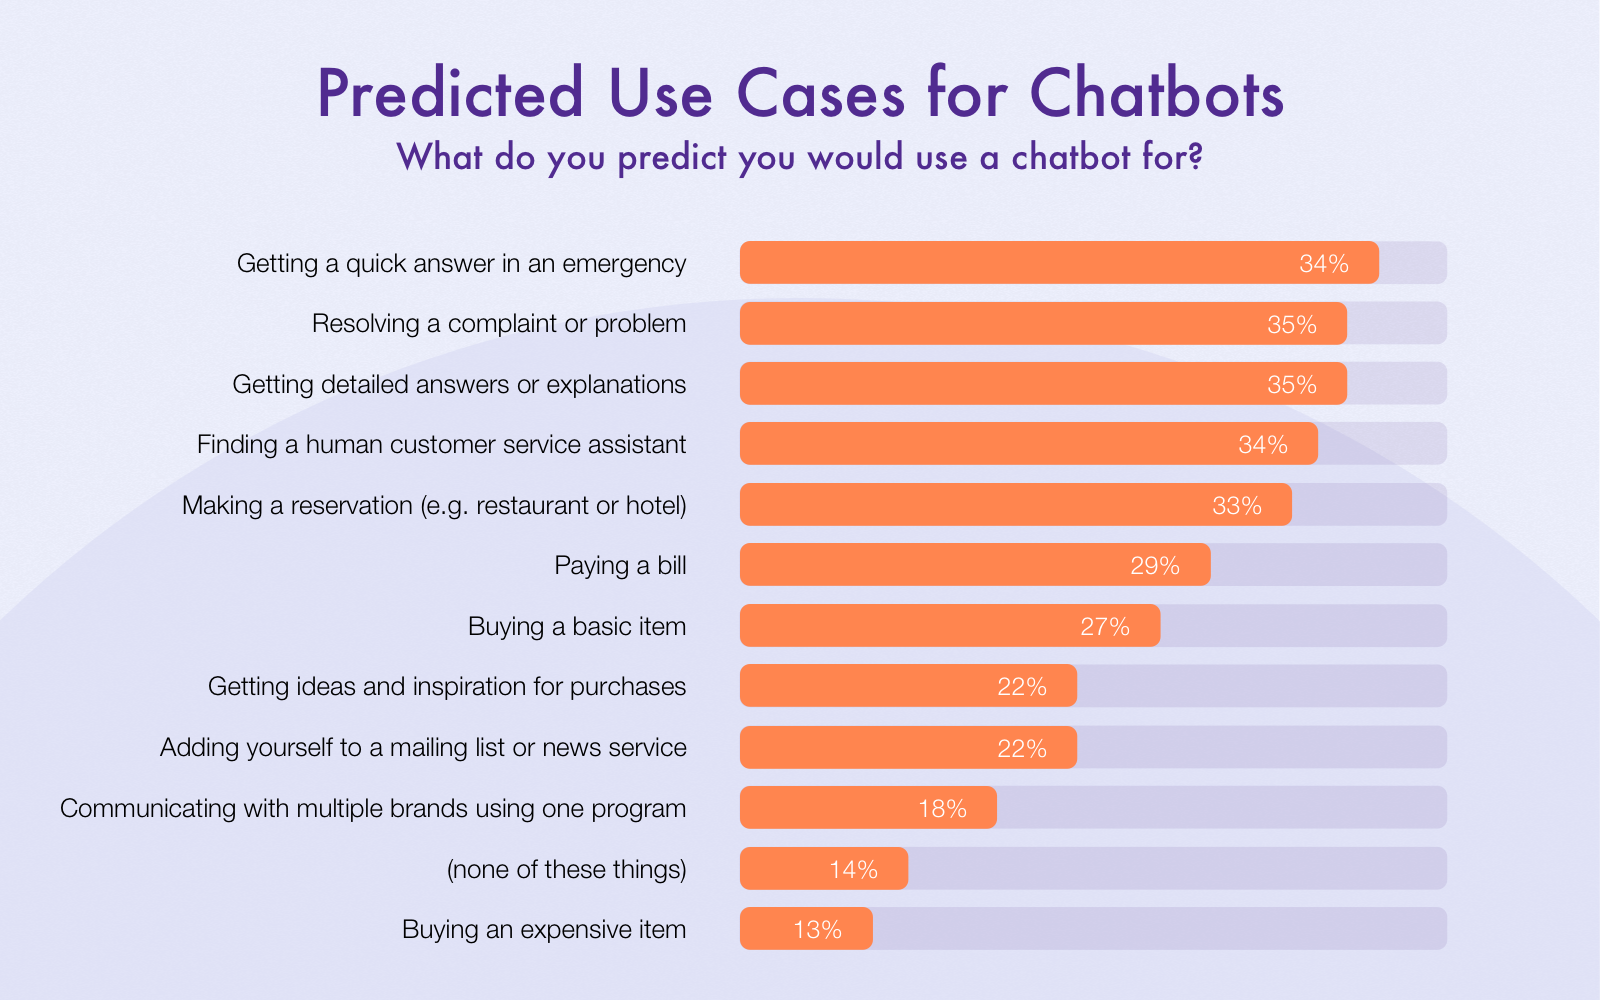 chatbot use cases